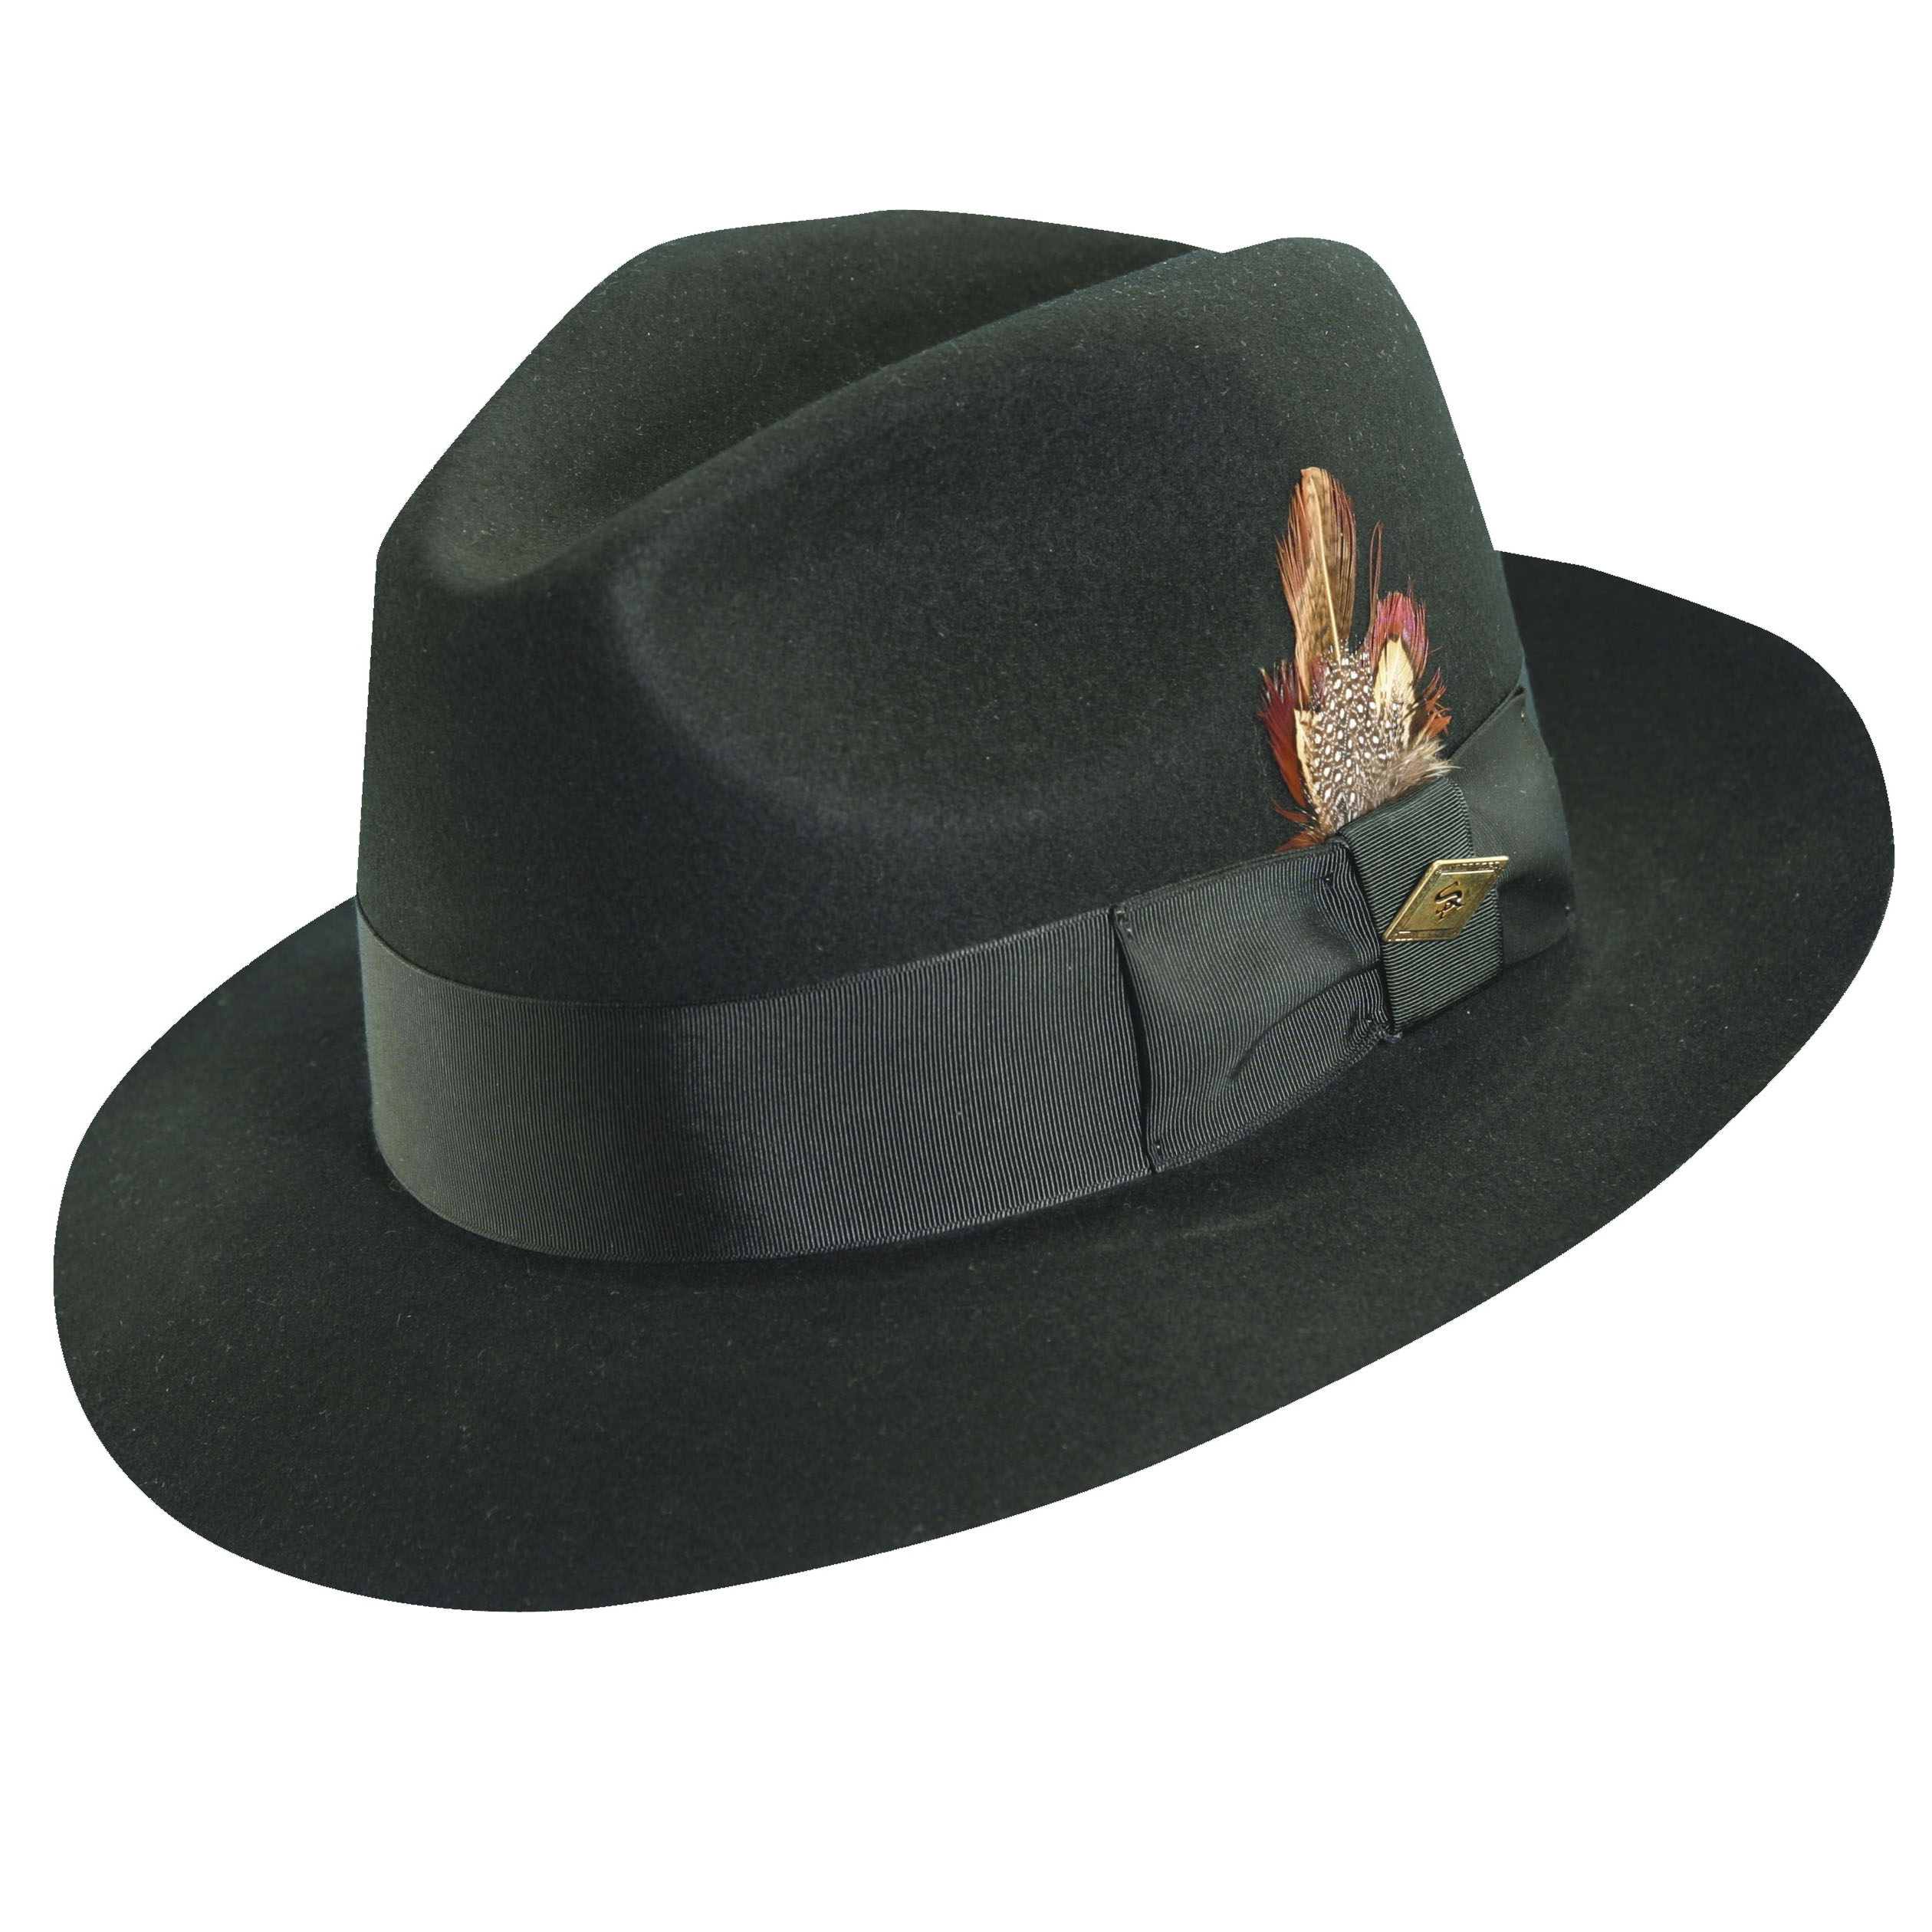 Men's Stacy Adams Wool Felt Fedora With Feather